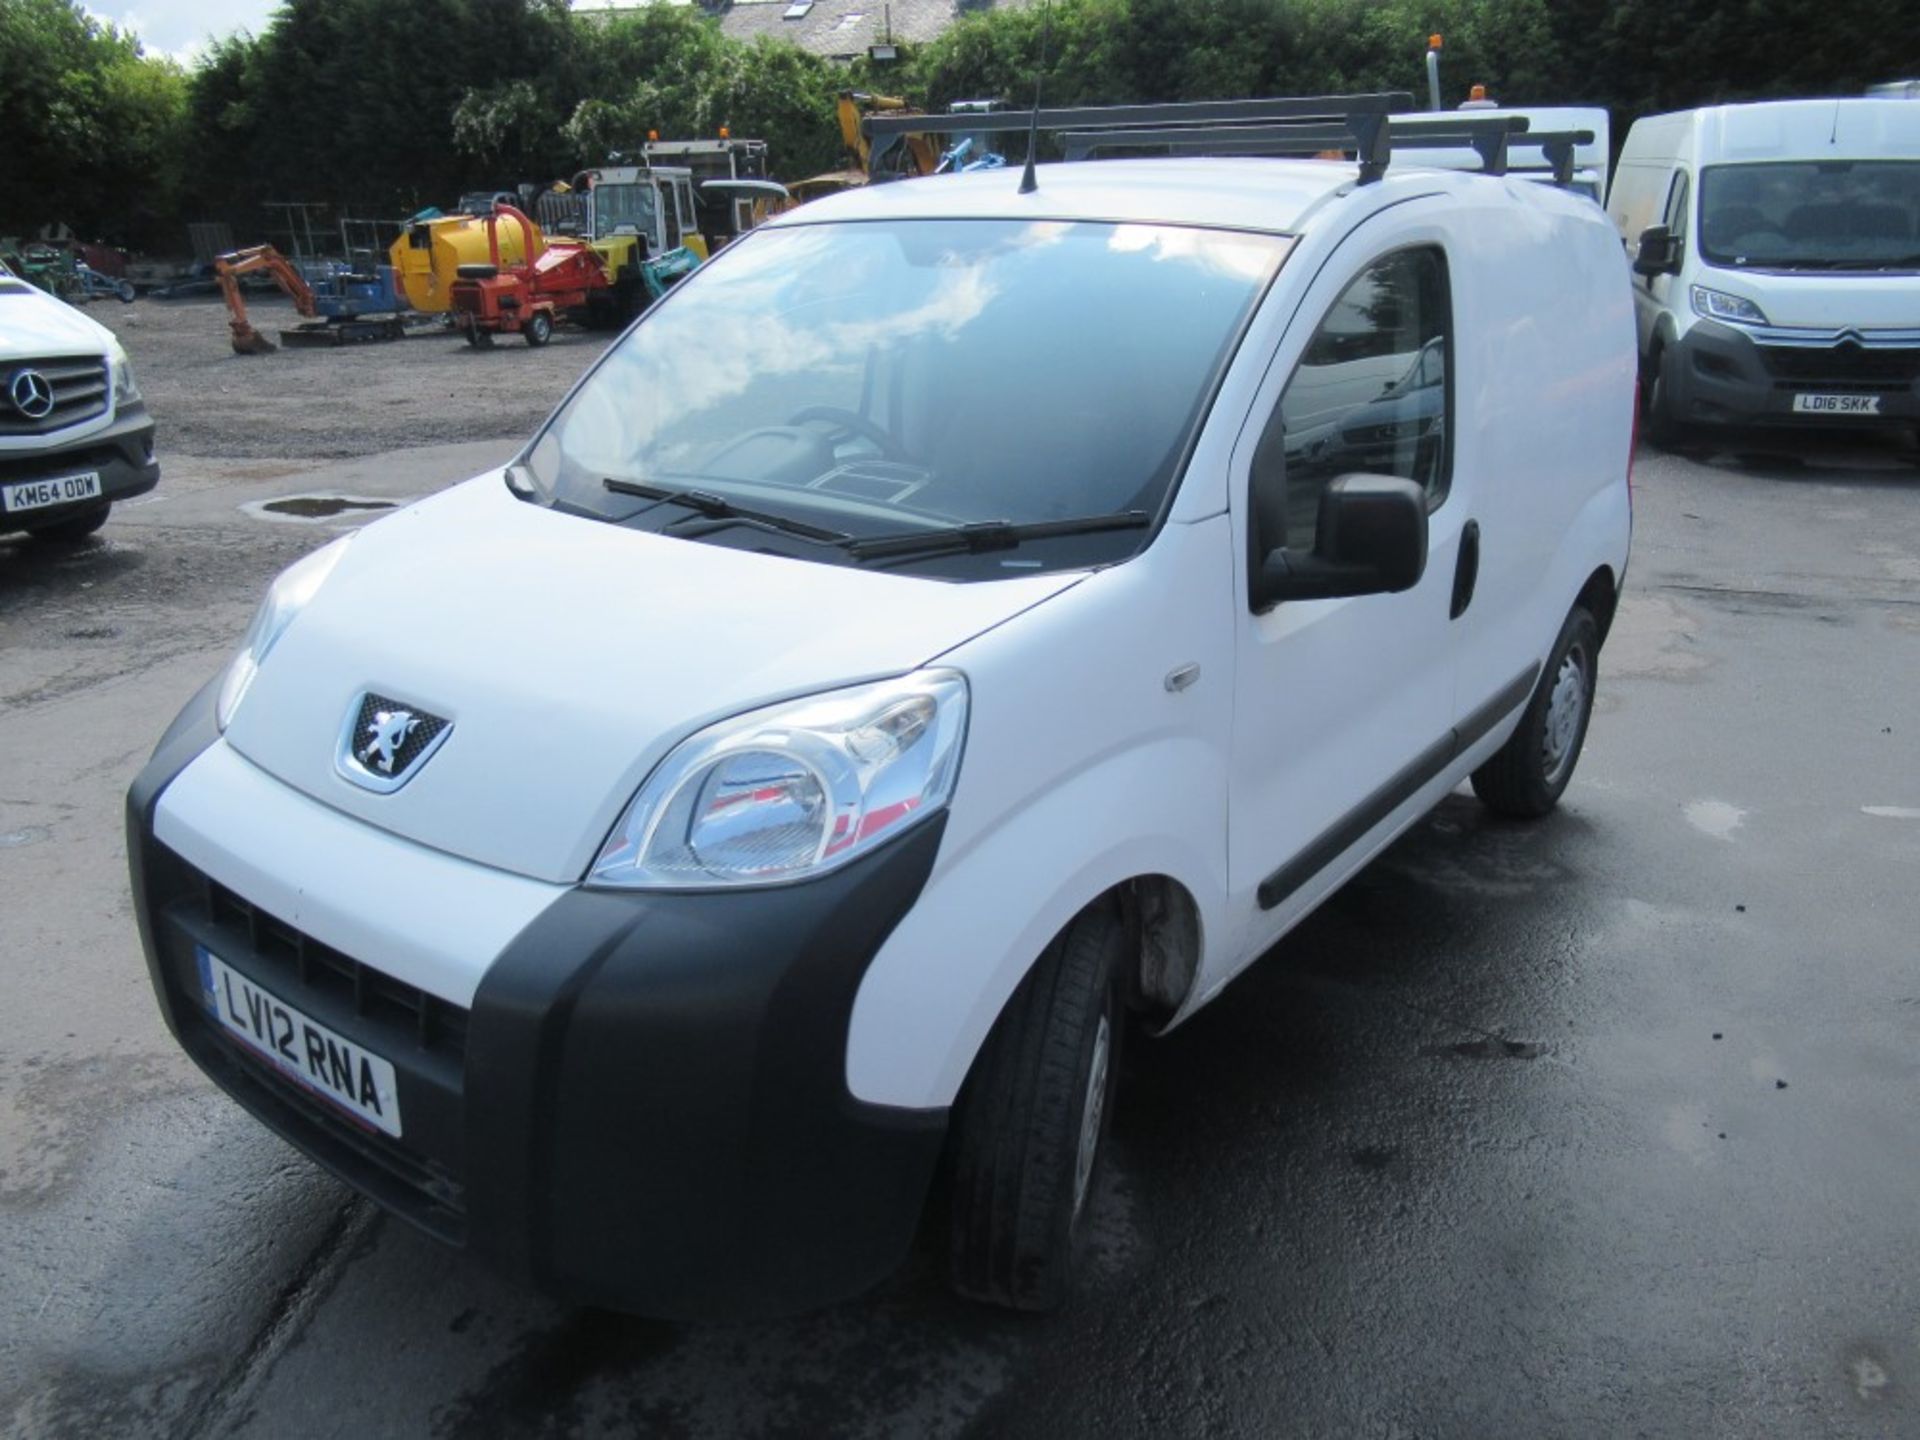 12 reg PEUGEOT BIPPER S HDI VAN, 1ST REG 04/12, TEST 09/19, 65875M, V5 HERE, 4 FORMER KEEPERS [NO - Image 2 of 5